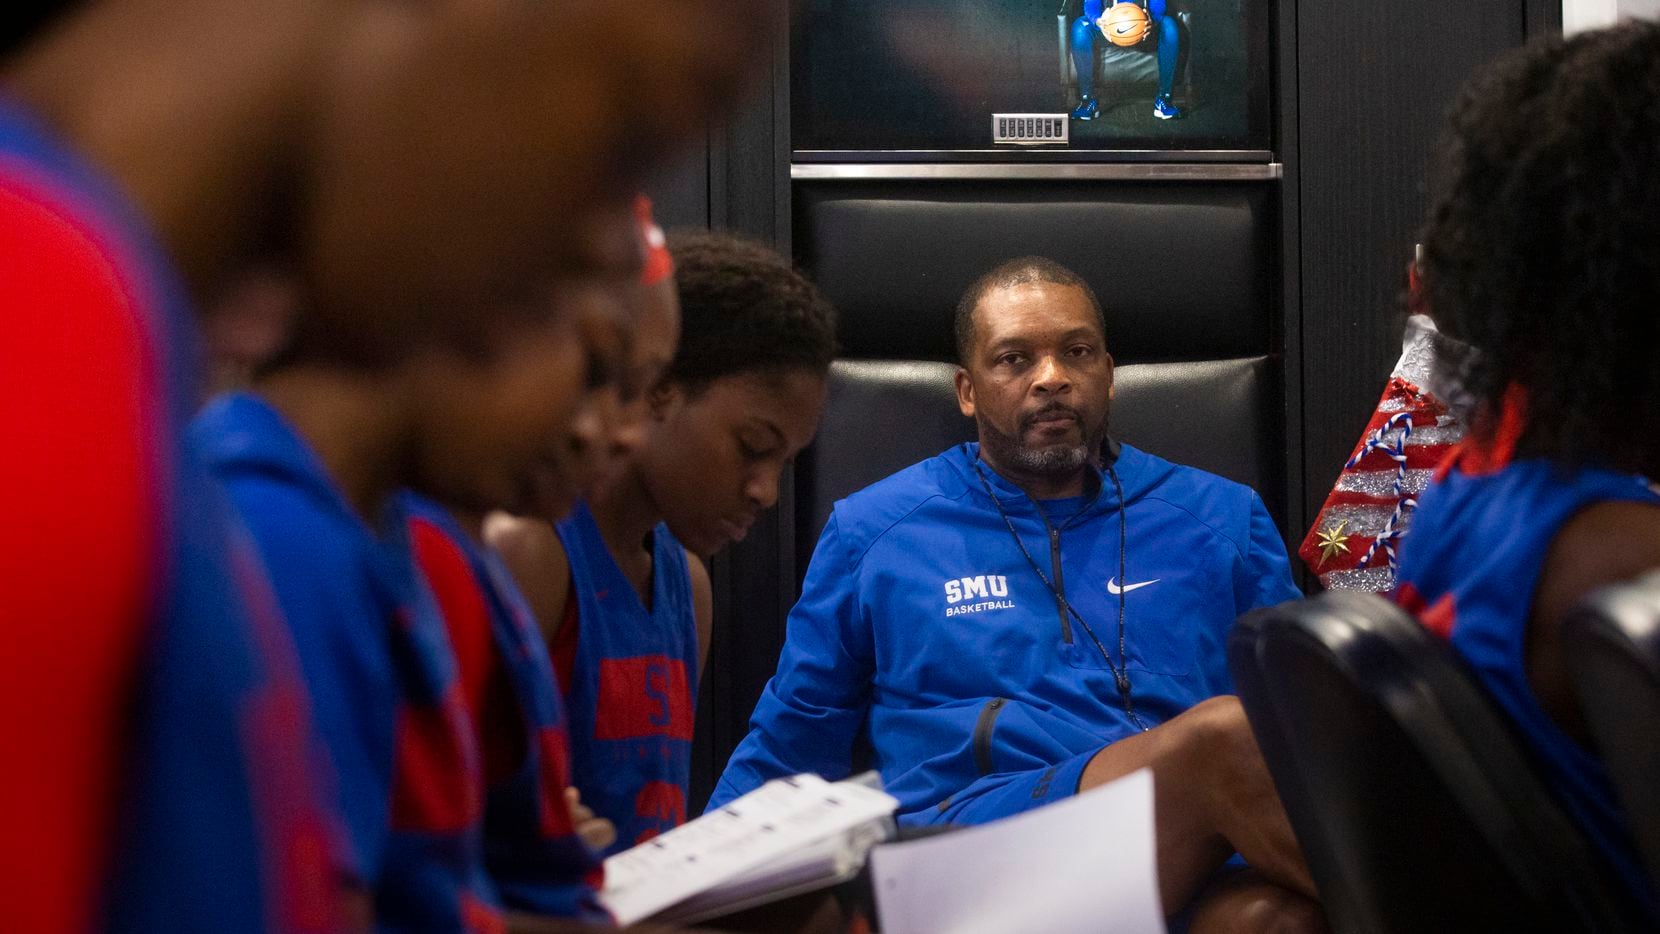 Travis Mays (center), head coach of SMU women's basketball, watches his team as they take notes during a film session reviewing the No. 1 ranked University of Connecticut Huskies. (Lynda M. Gonzalez/The Dallas Morning News)